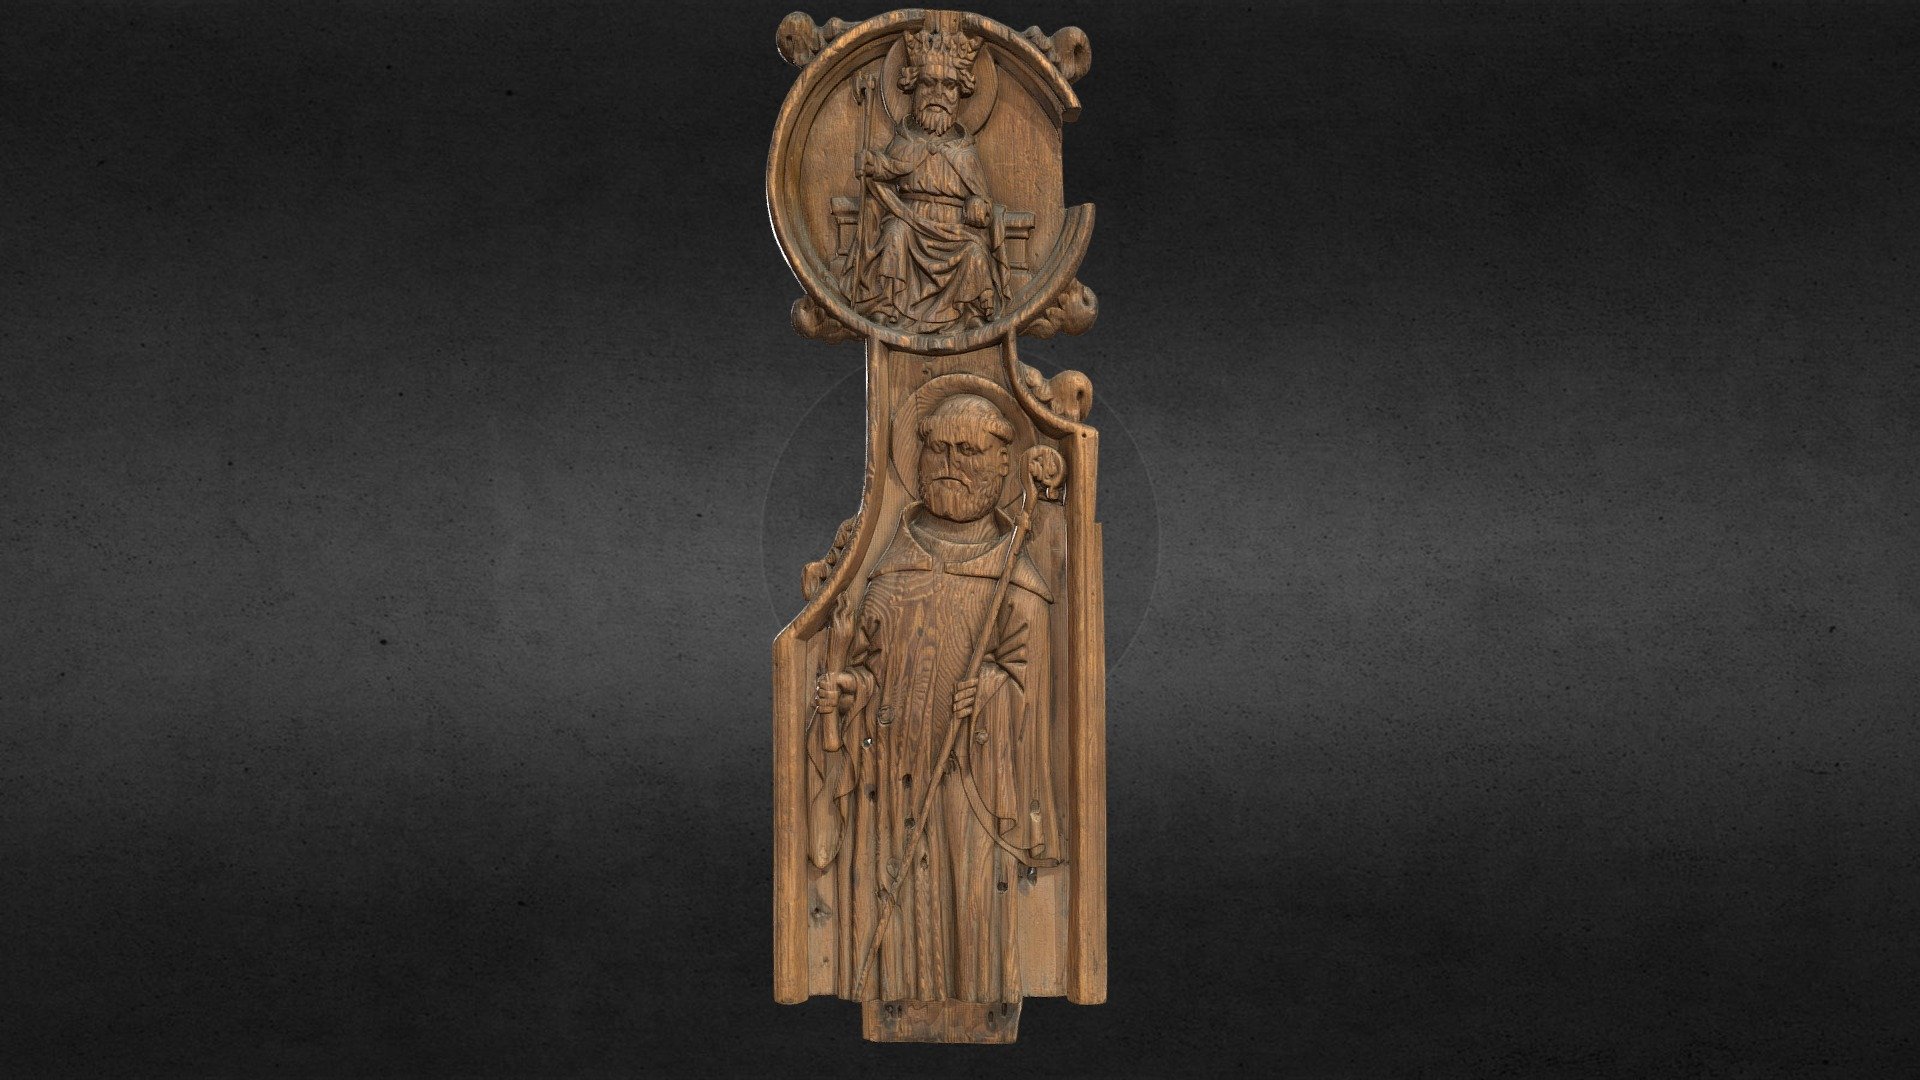 The principal motif is a tonsured abbot standing dressed in a cowl; his halo indicates that he is a saint, standing with his abbot's staff in his left hand and a buring torch as his emblem in his right. The staff, baculus was carried as the symbol of the pastoral duty.
  There has been some despute to the identification to the person on the bench end, some say he cannot be identified while others have suggested the abbot to be St. Brendan, as his emblem in german documents is a burning torch, and St. brendan can be related back to Kirkjubø.
  In the rounded top panel sits St. Olav enthroned. with a halo, crown, his long handed axe in his right and and the earth/orb in his left.
  The small escutcheon above where the olique desk top would have been is the faroes coat of arms of the ram. 
  In the rounded upper top panel we find Erik of Pomerania's Nordic Coat of Arms, the three crowns.

Dimension: 138 x 44 x 7 cm.

Created by Petur Hansen, using Artec Eva scanner and Artec Studio 16 3d model